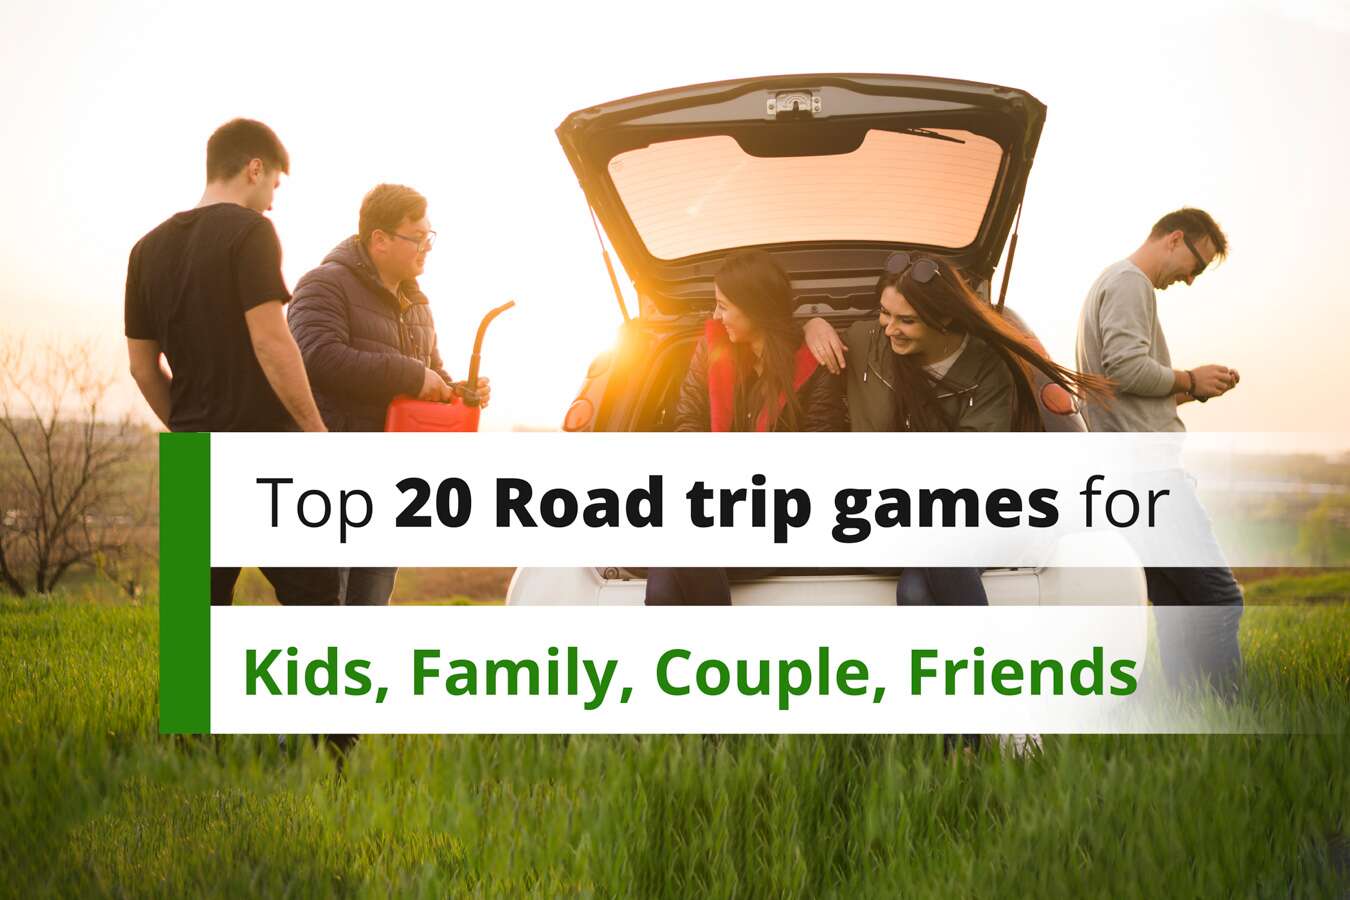 8 fun road trip games to play with your friends (that aren't I Spy)